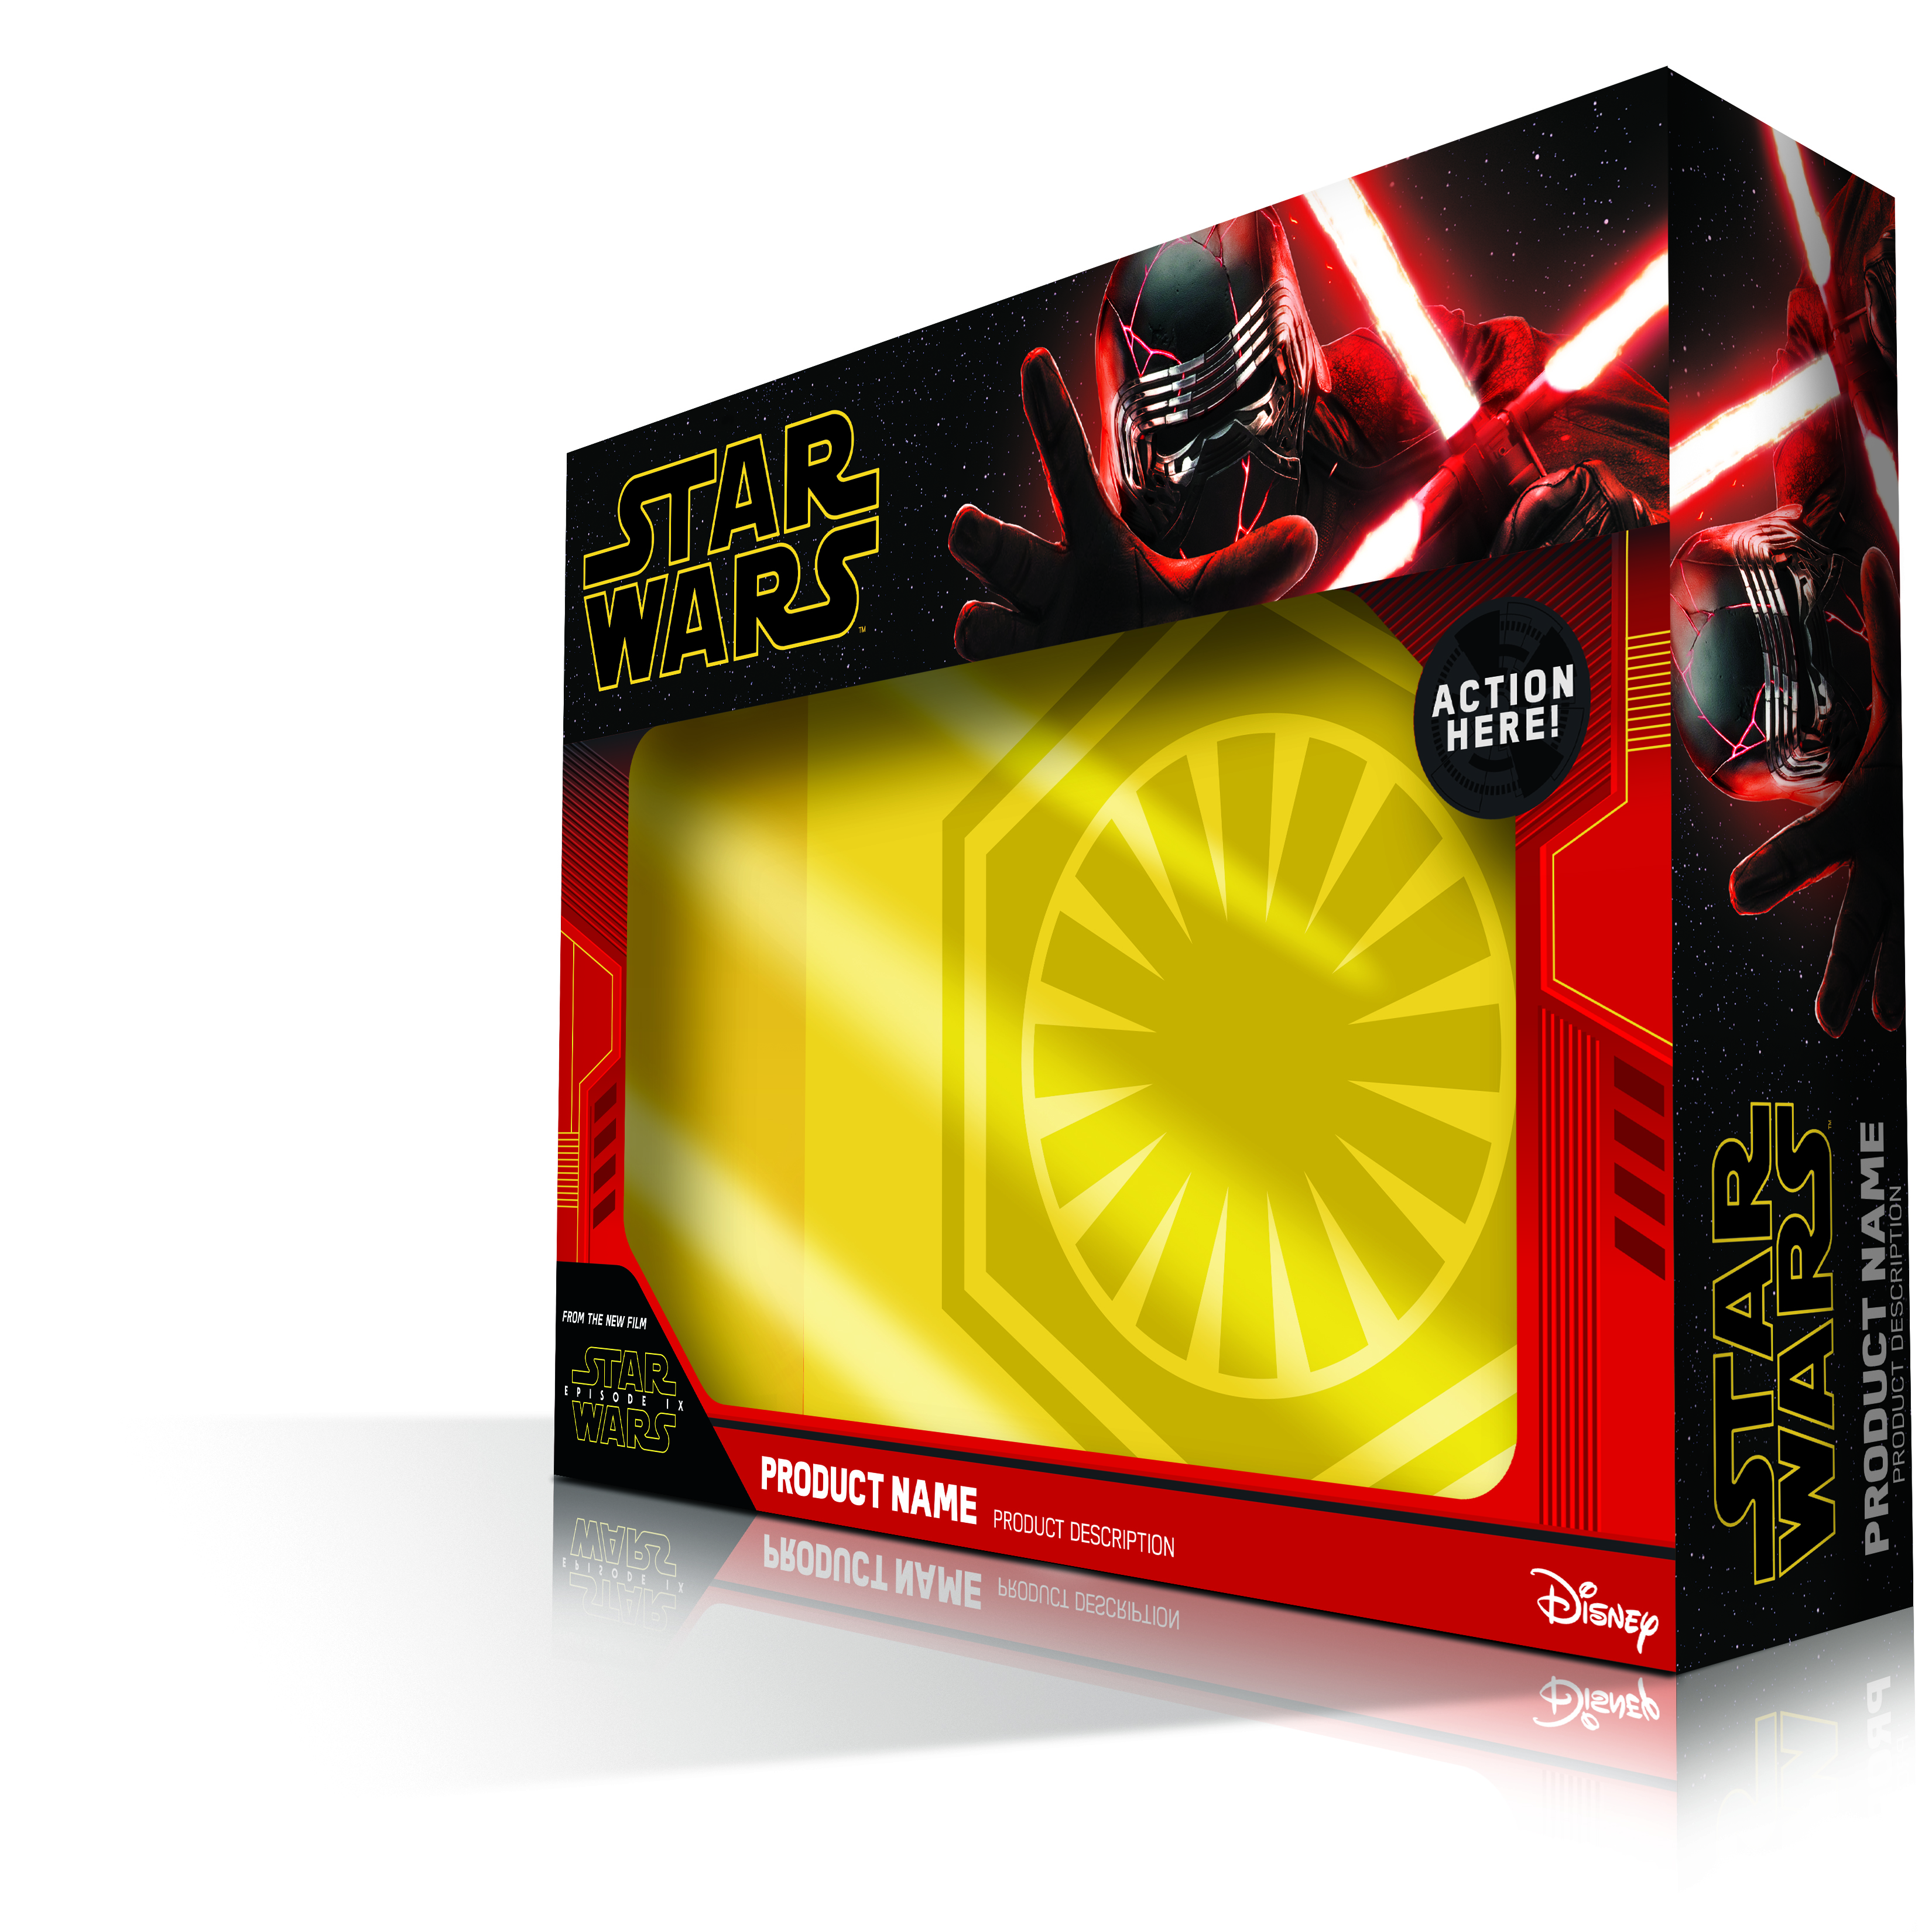 Official Star Wars: The Rise of Skywalker Consumer Products Packaging Revealed